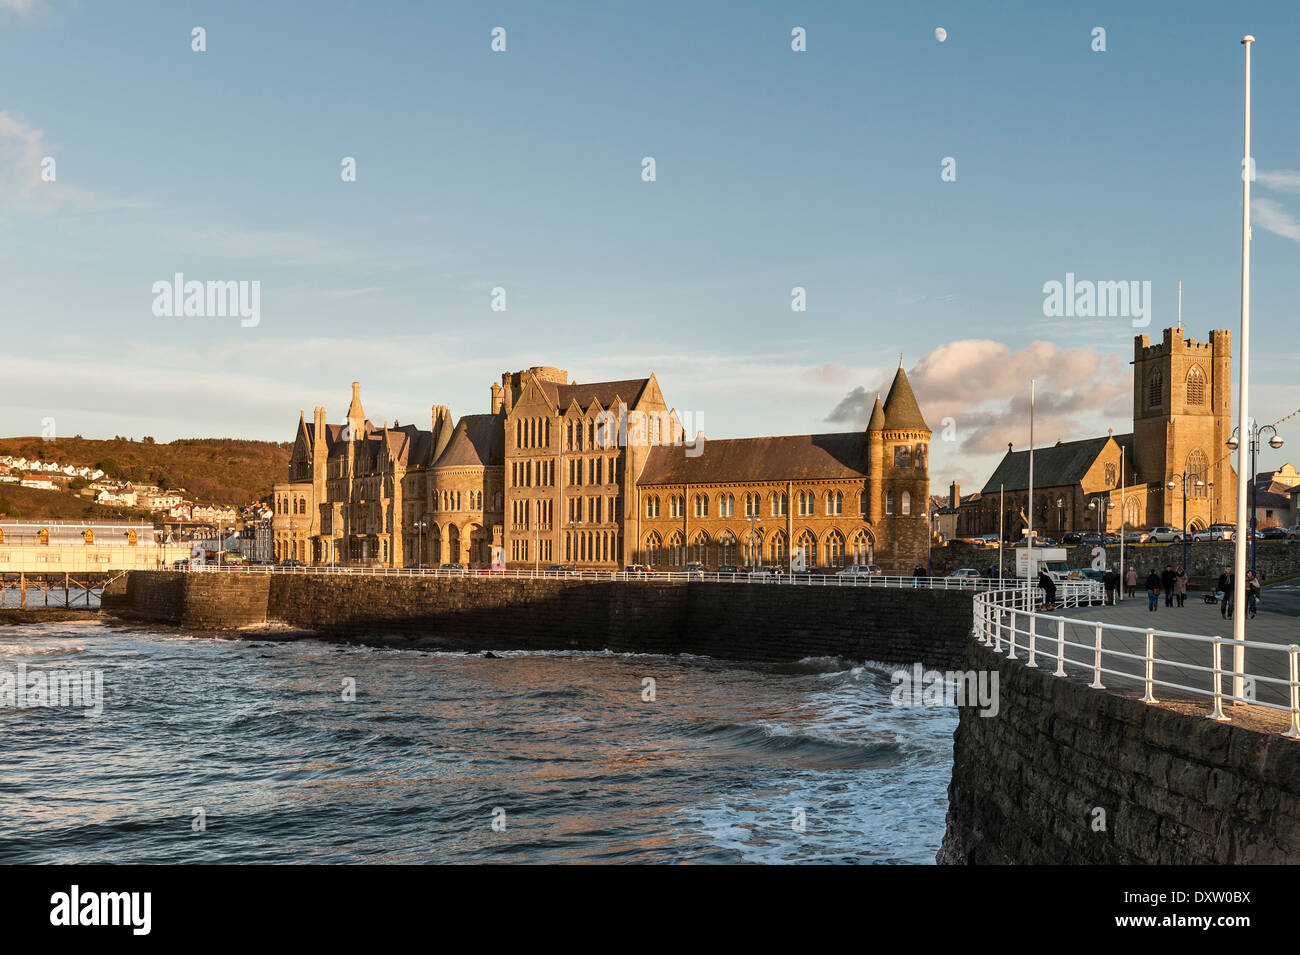 The Old College, Aberystwyth, Wales, UK. Built in 1886, it is part of Aberystwyth University Stock Photo